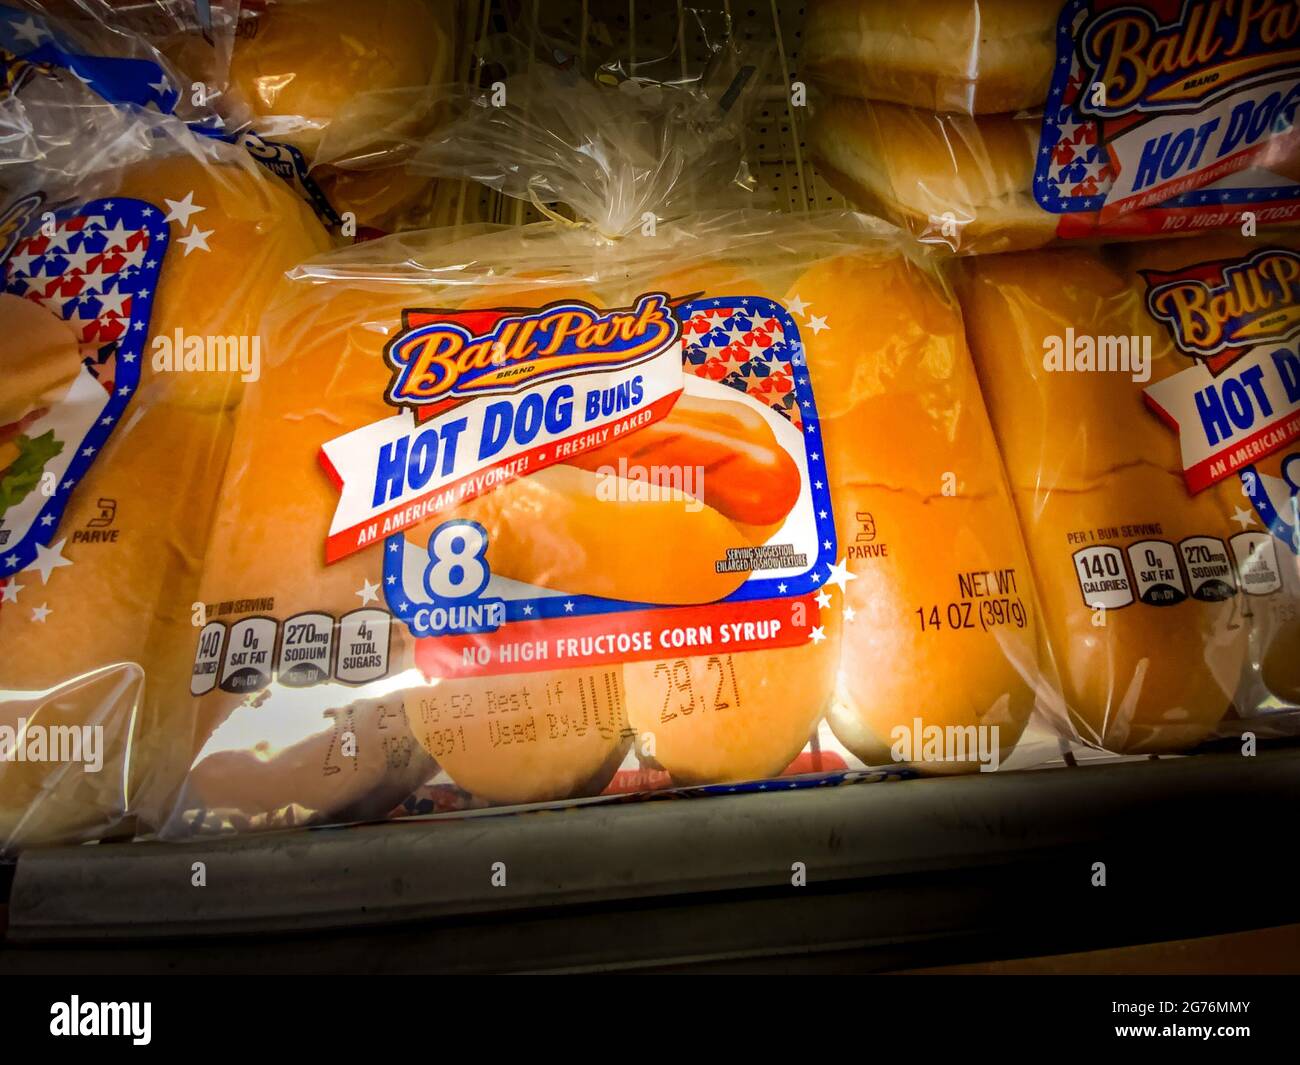 Shiloh, IL--July 10, 2021; a package of eight hotdog buns branded Ball Park and made by Bimbo Bakeries North America sits on a grocery store shelf wit Stock Photo